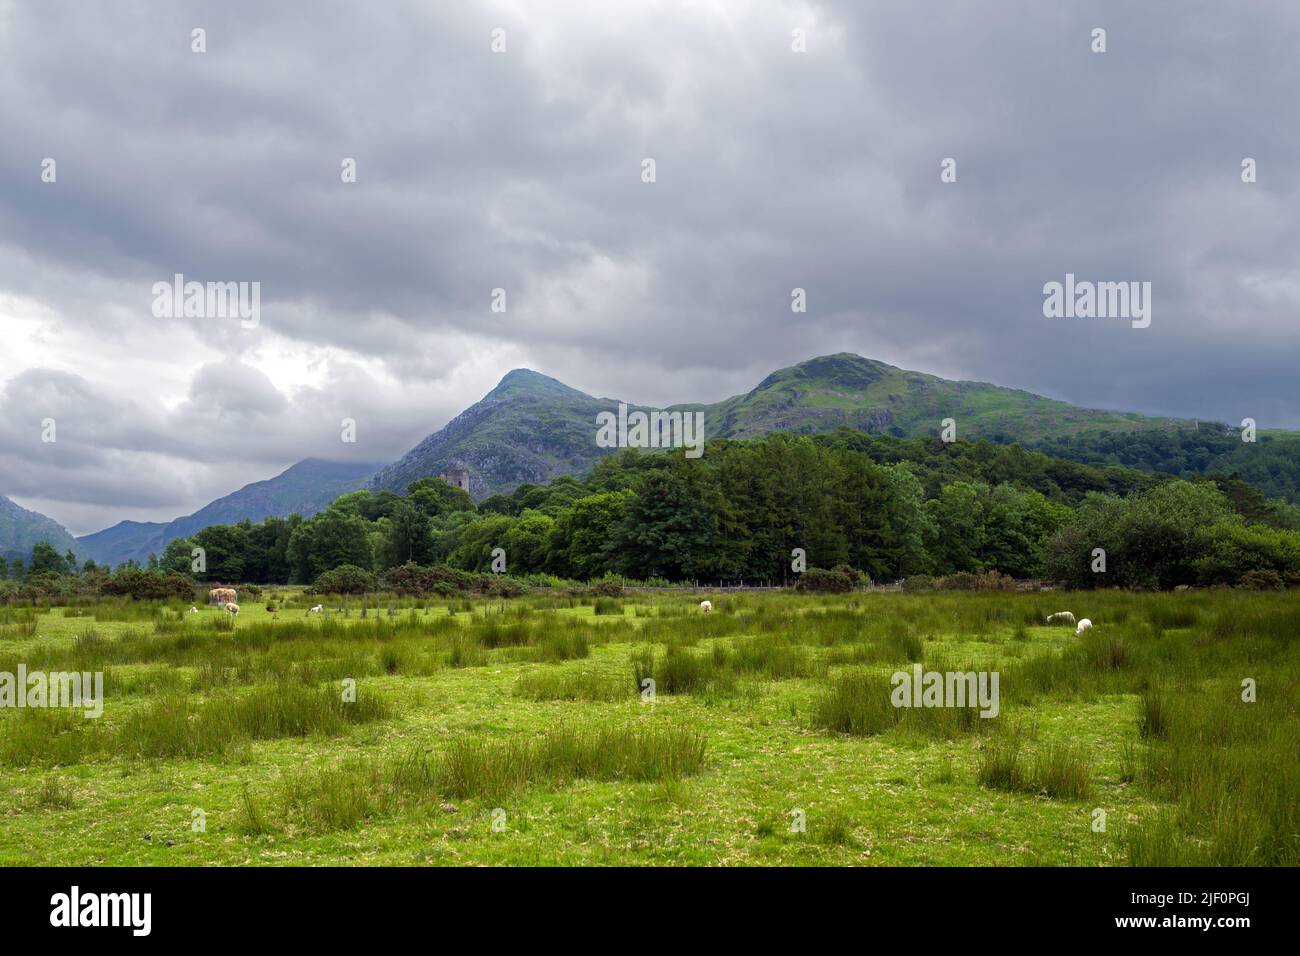 Derlwyn is a peak just to the south of Llanberis in the Snowdonia National Park. The photograph was taken from the Padarn Country Park. Stock Photo